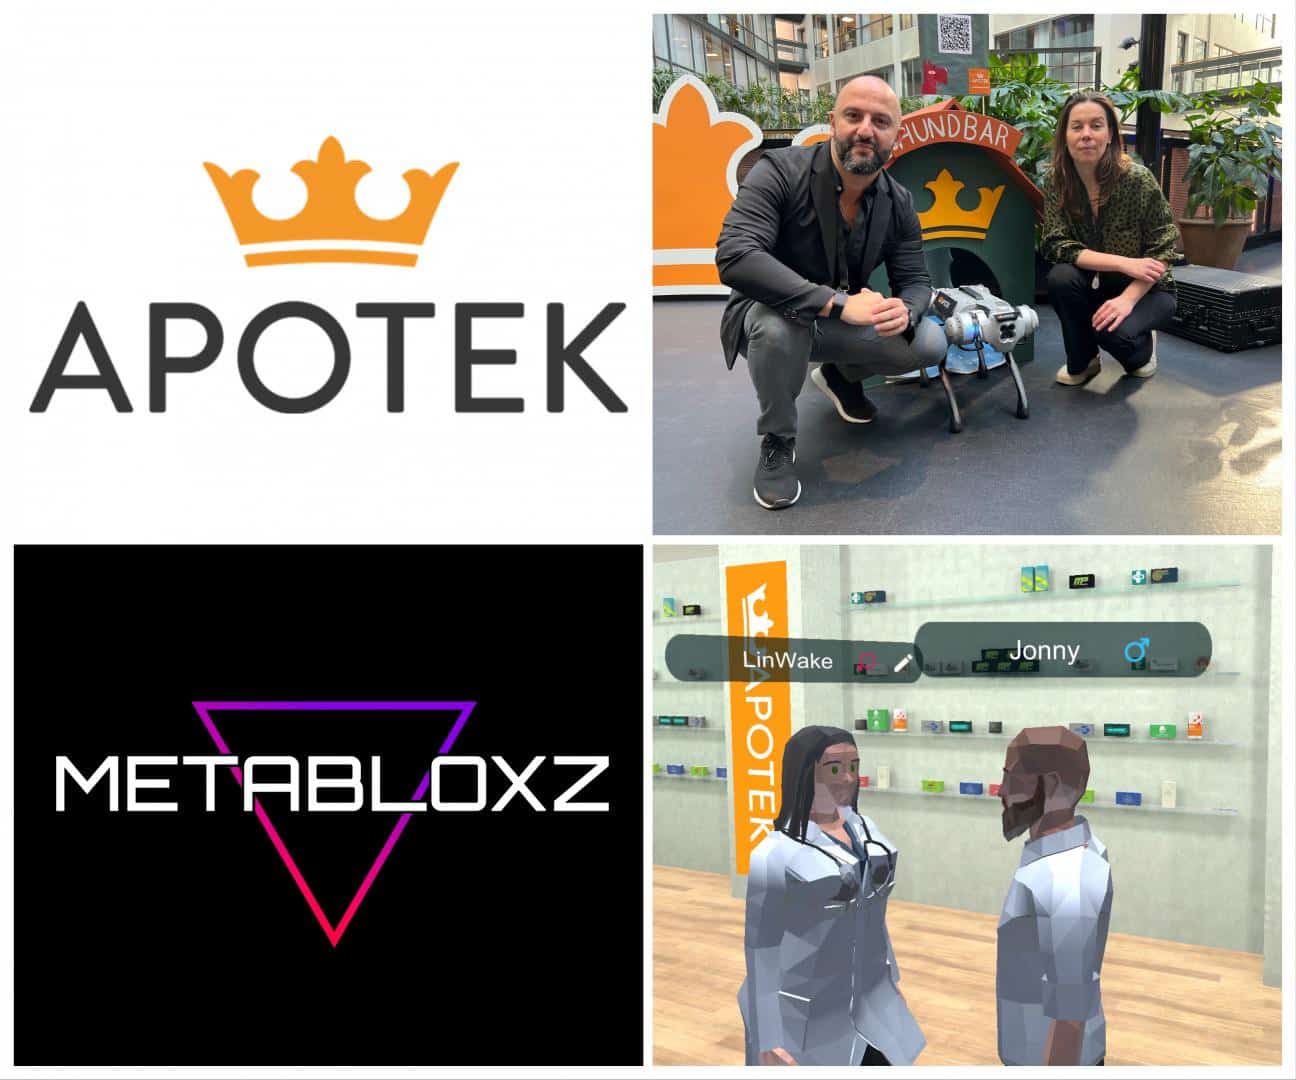 Metabloxz-brings-a-major-swedish-pharmacy-chain-into-the-metaverse